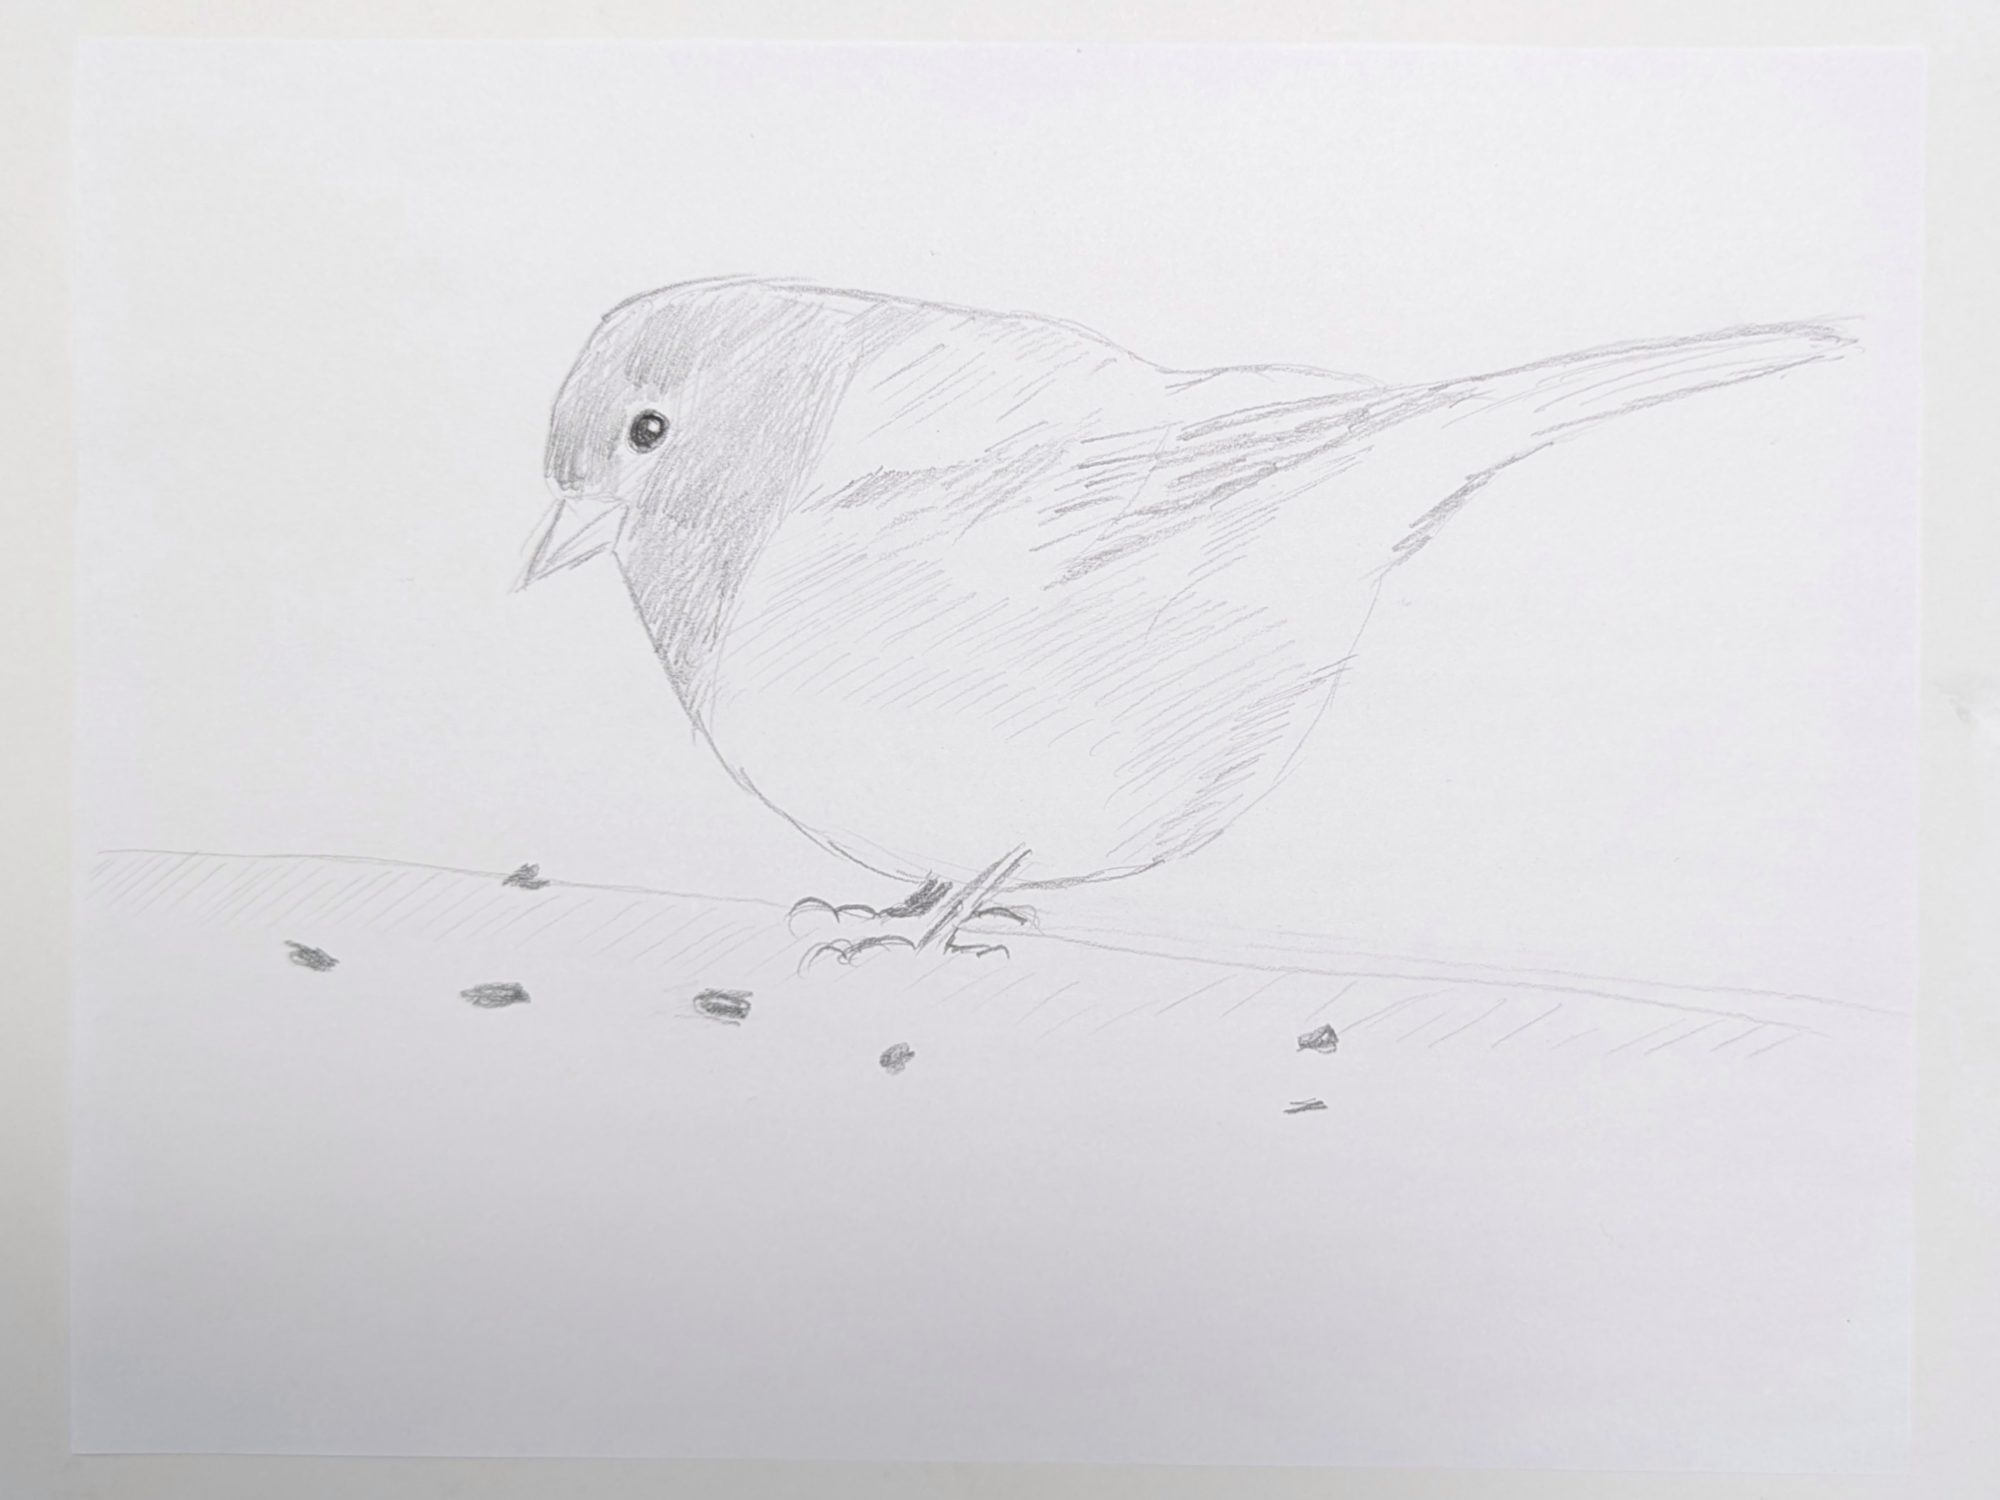 A pencil sketch draft of a Dark-eyed Junco surrounded by some seeds